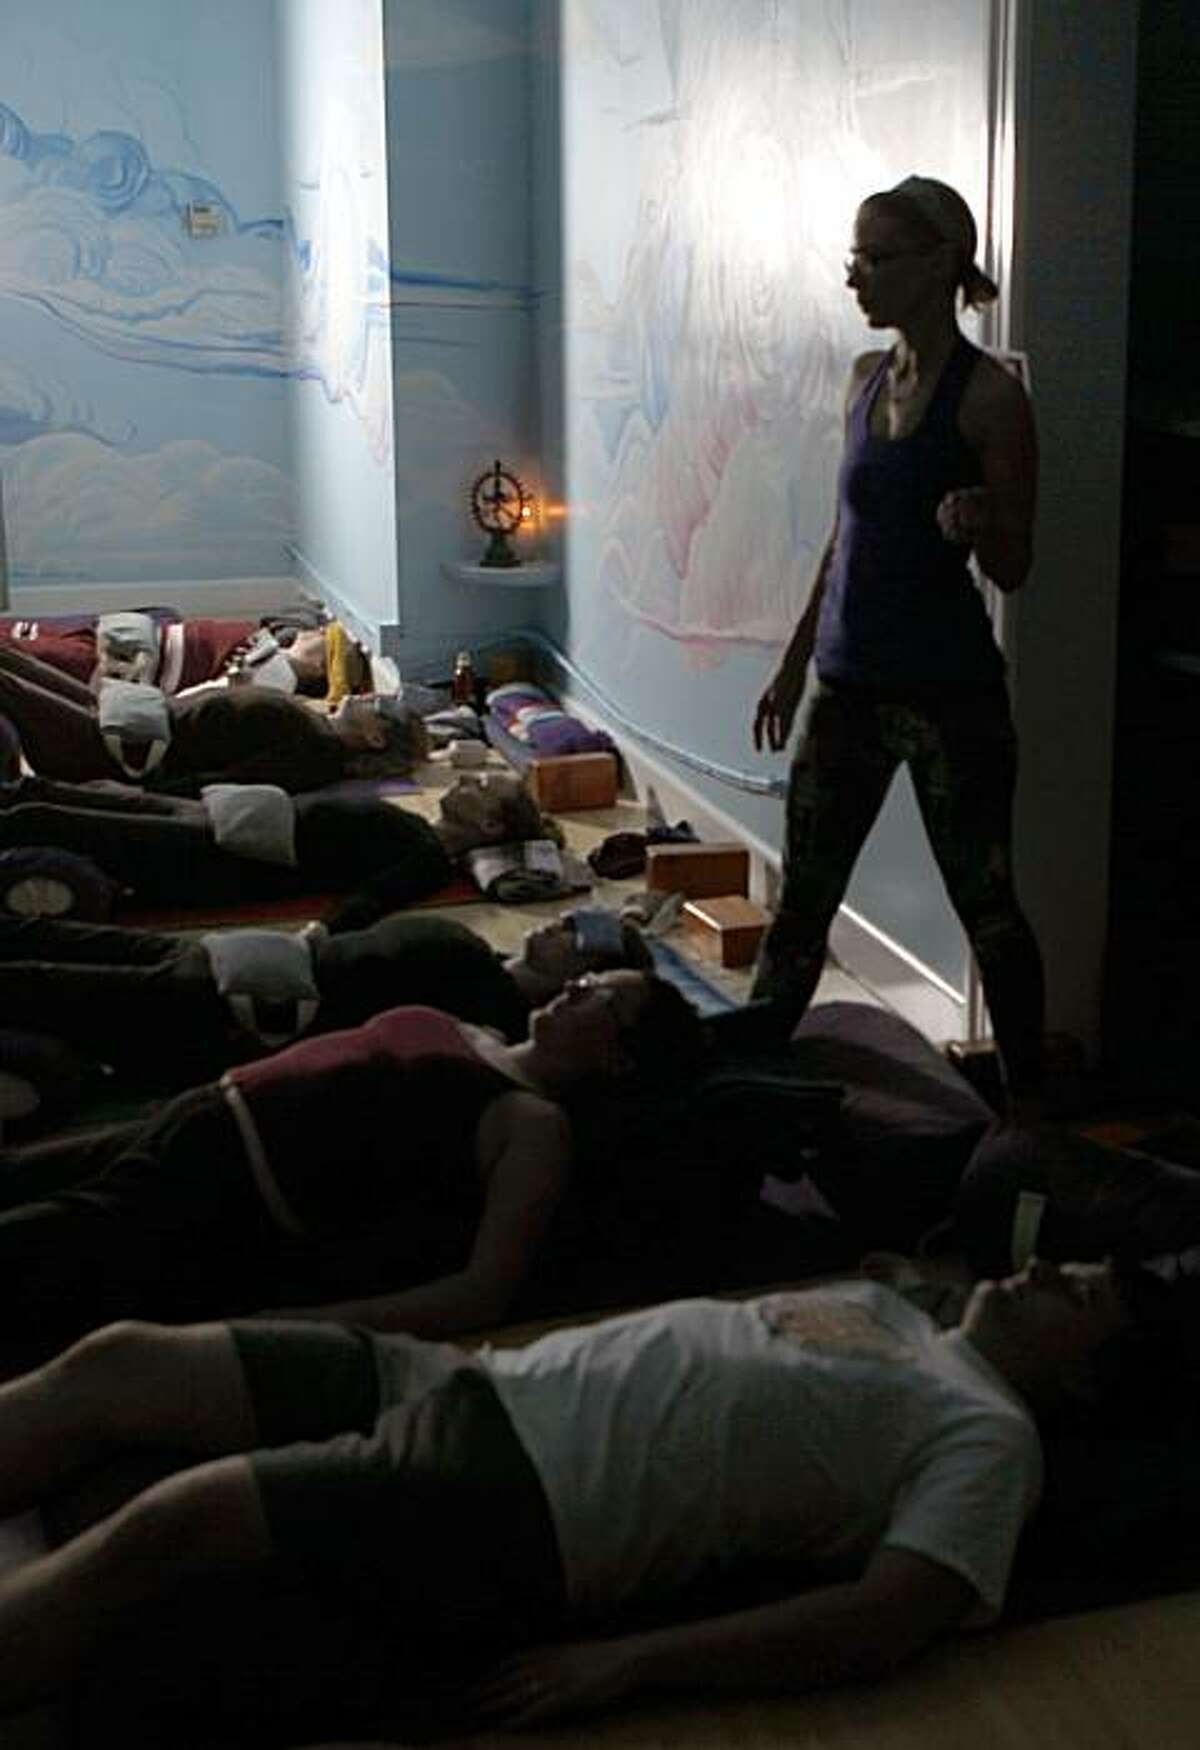 Elise Collins standing, teaches a new form of Yoga called Restorative Yoga - which is basically napping for grownups. People get in various positions of repose - on pillows, blankets and some wearing eye pillows, and chill out at Stanyan Yoga Tree in San Francisco Saturday Jan. 9, 2010